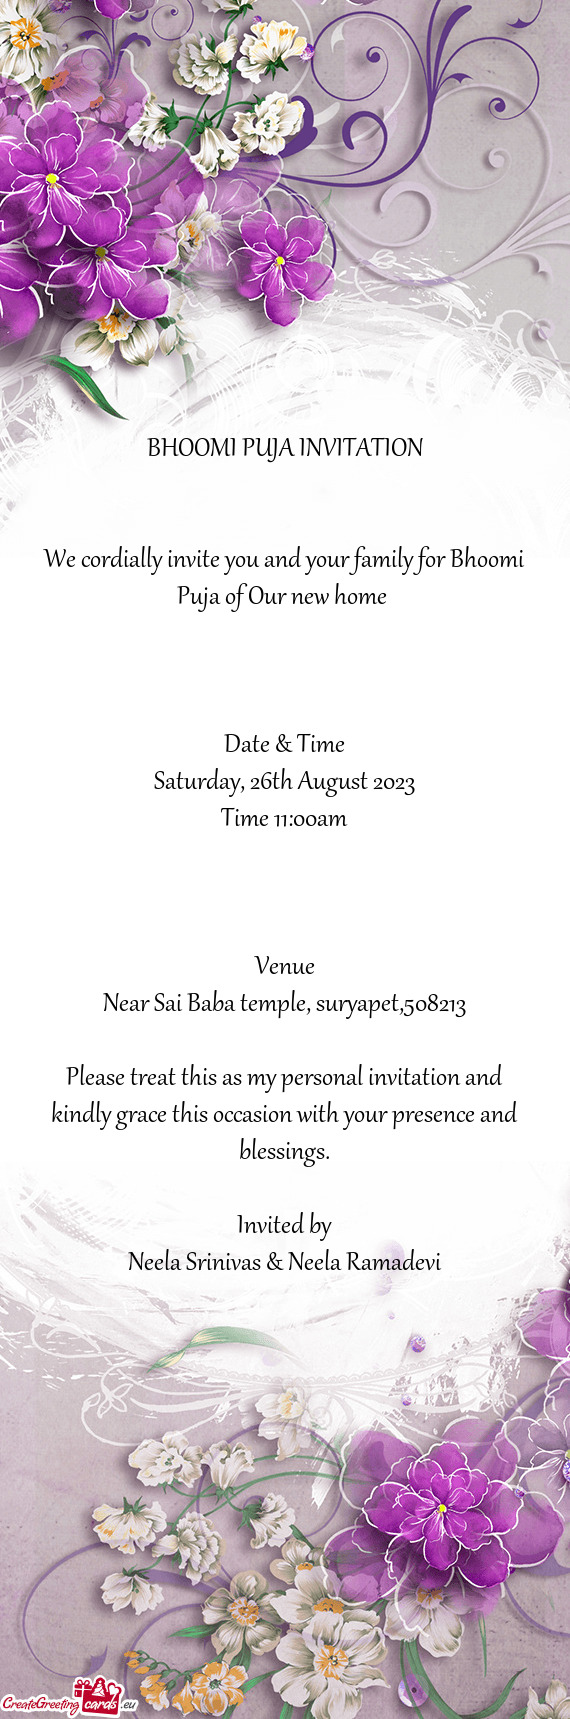 We cordially invite you and your family for Bhoomi Puja of Our new home